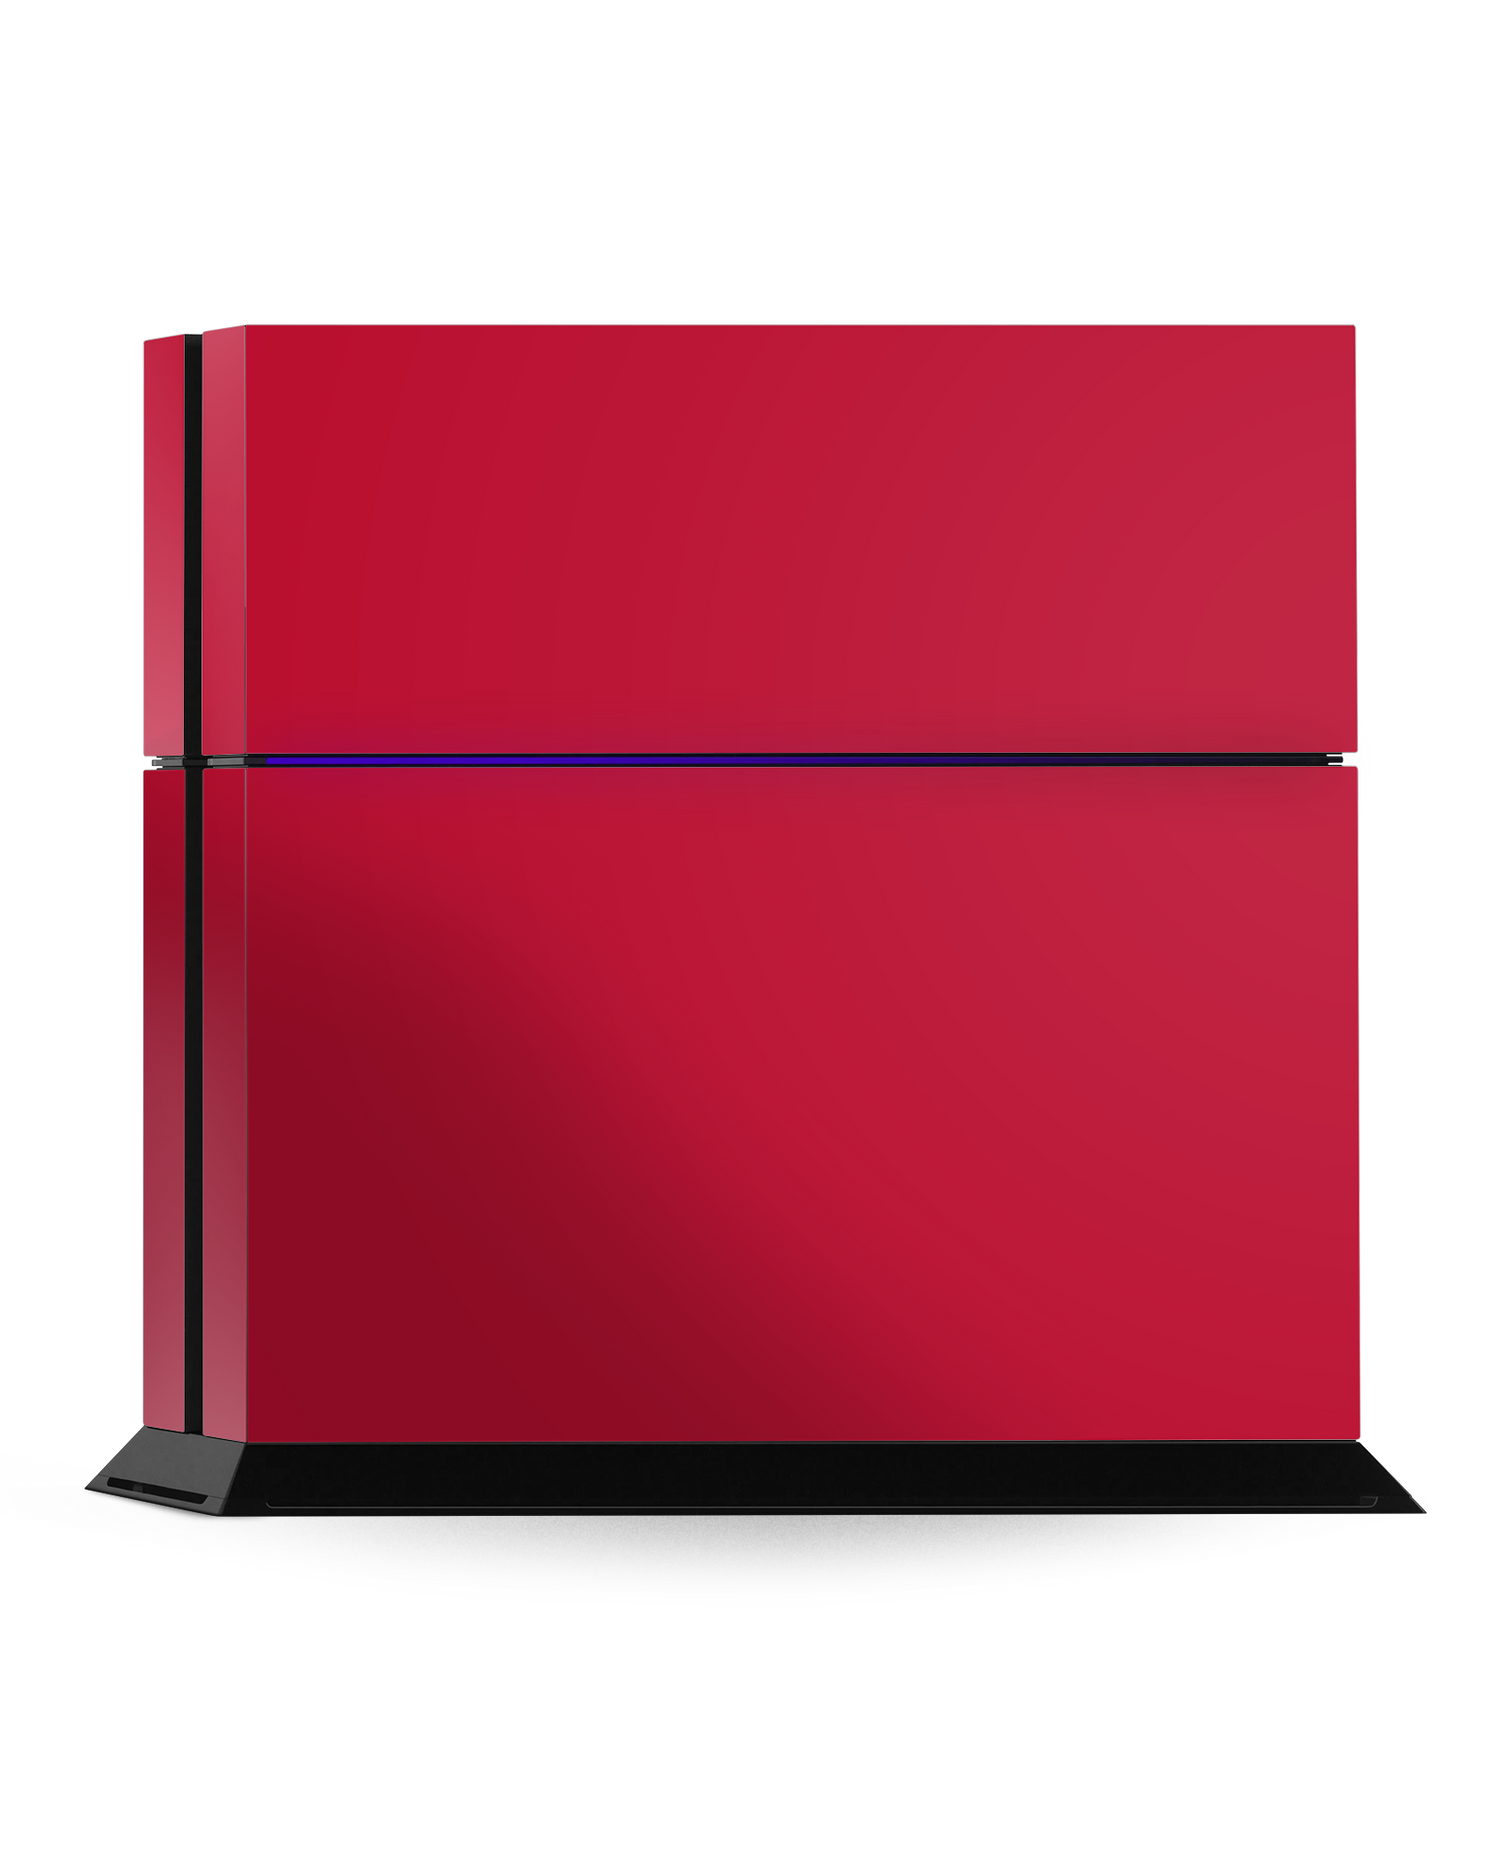 RED Console Skin for Sony PlayStation 4: Standing